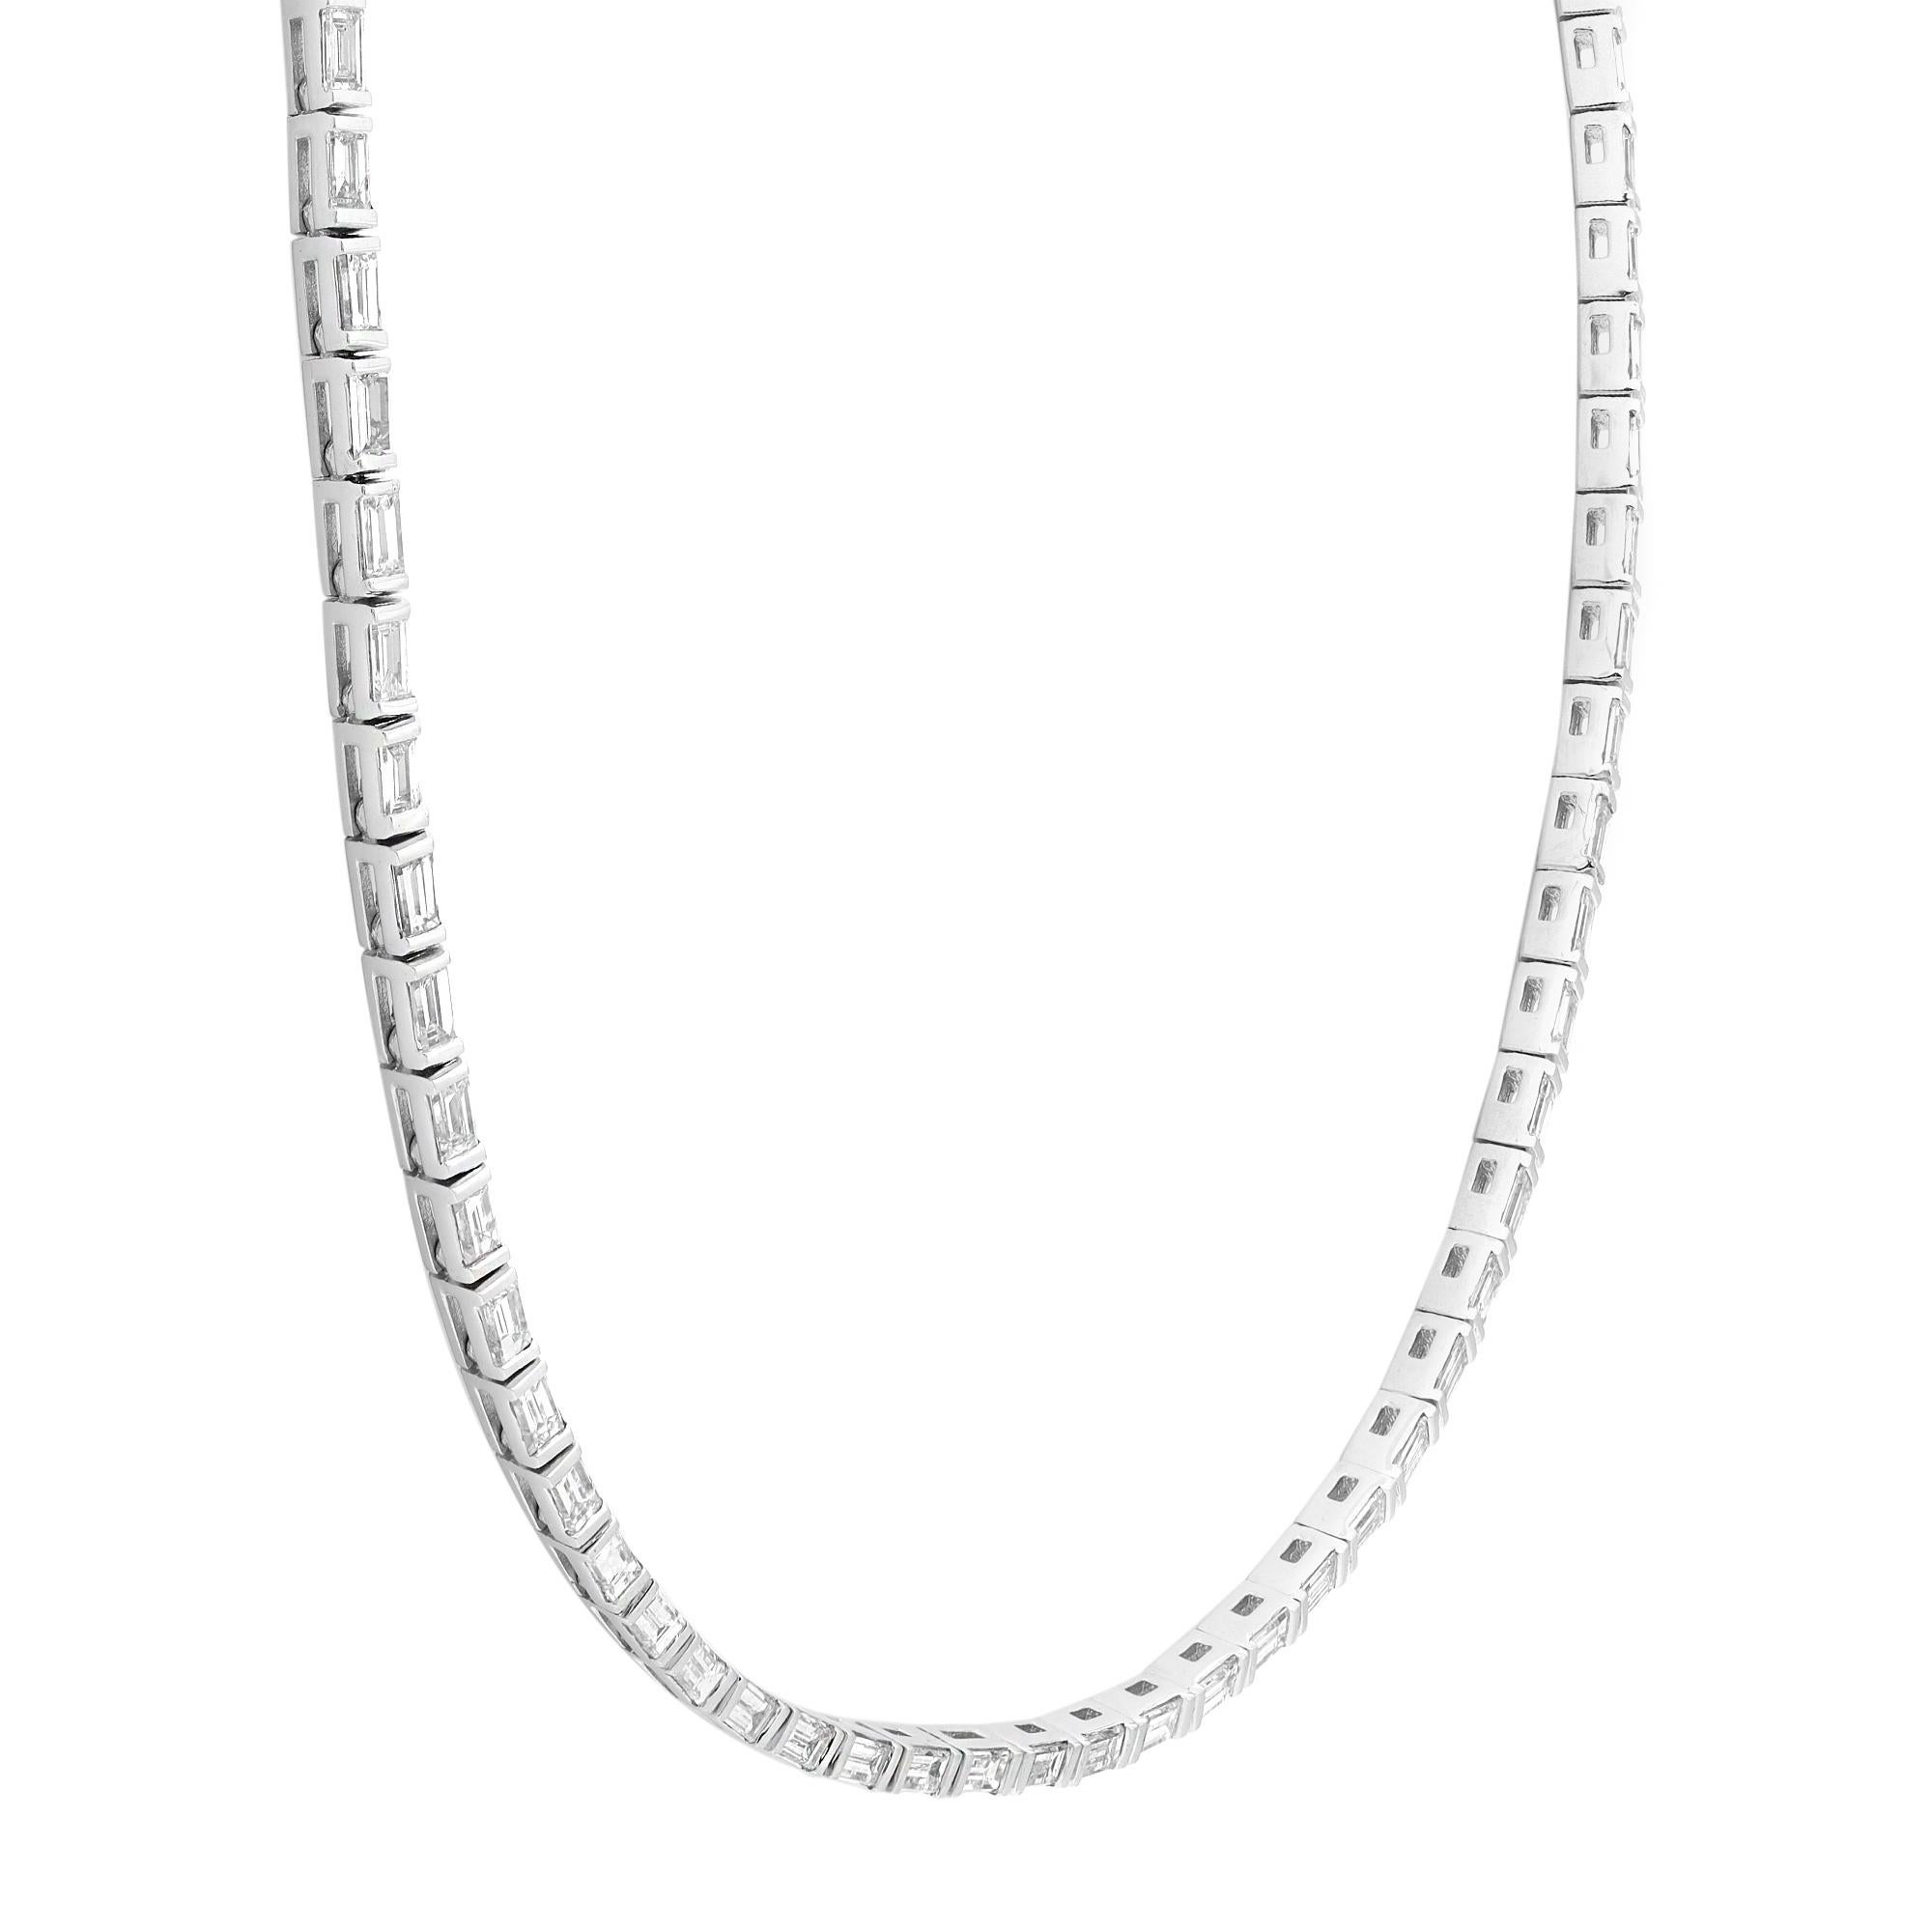 This dazzling diamond tennis necklace is perfect for a shimmering evening look. Crafted in fine 18k white gold. This sparkling Baguette cut diamond lined tennis necklace features 107 diamonds totaling 4.60 carats in half bezel setting. Diamond